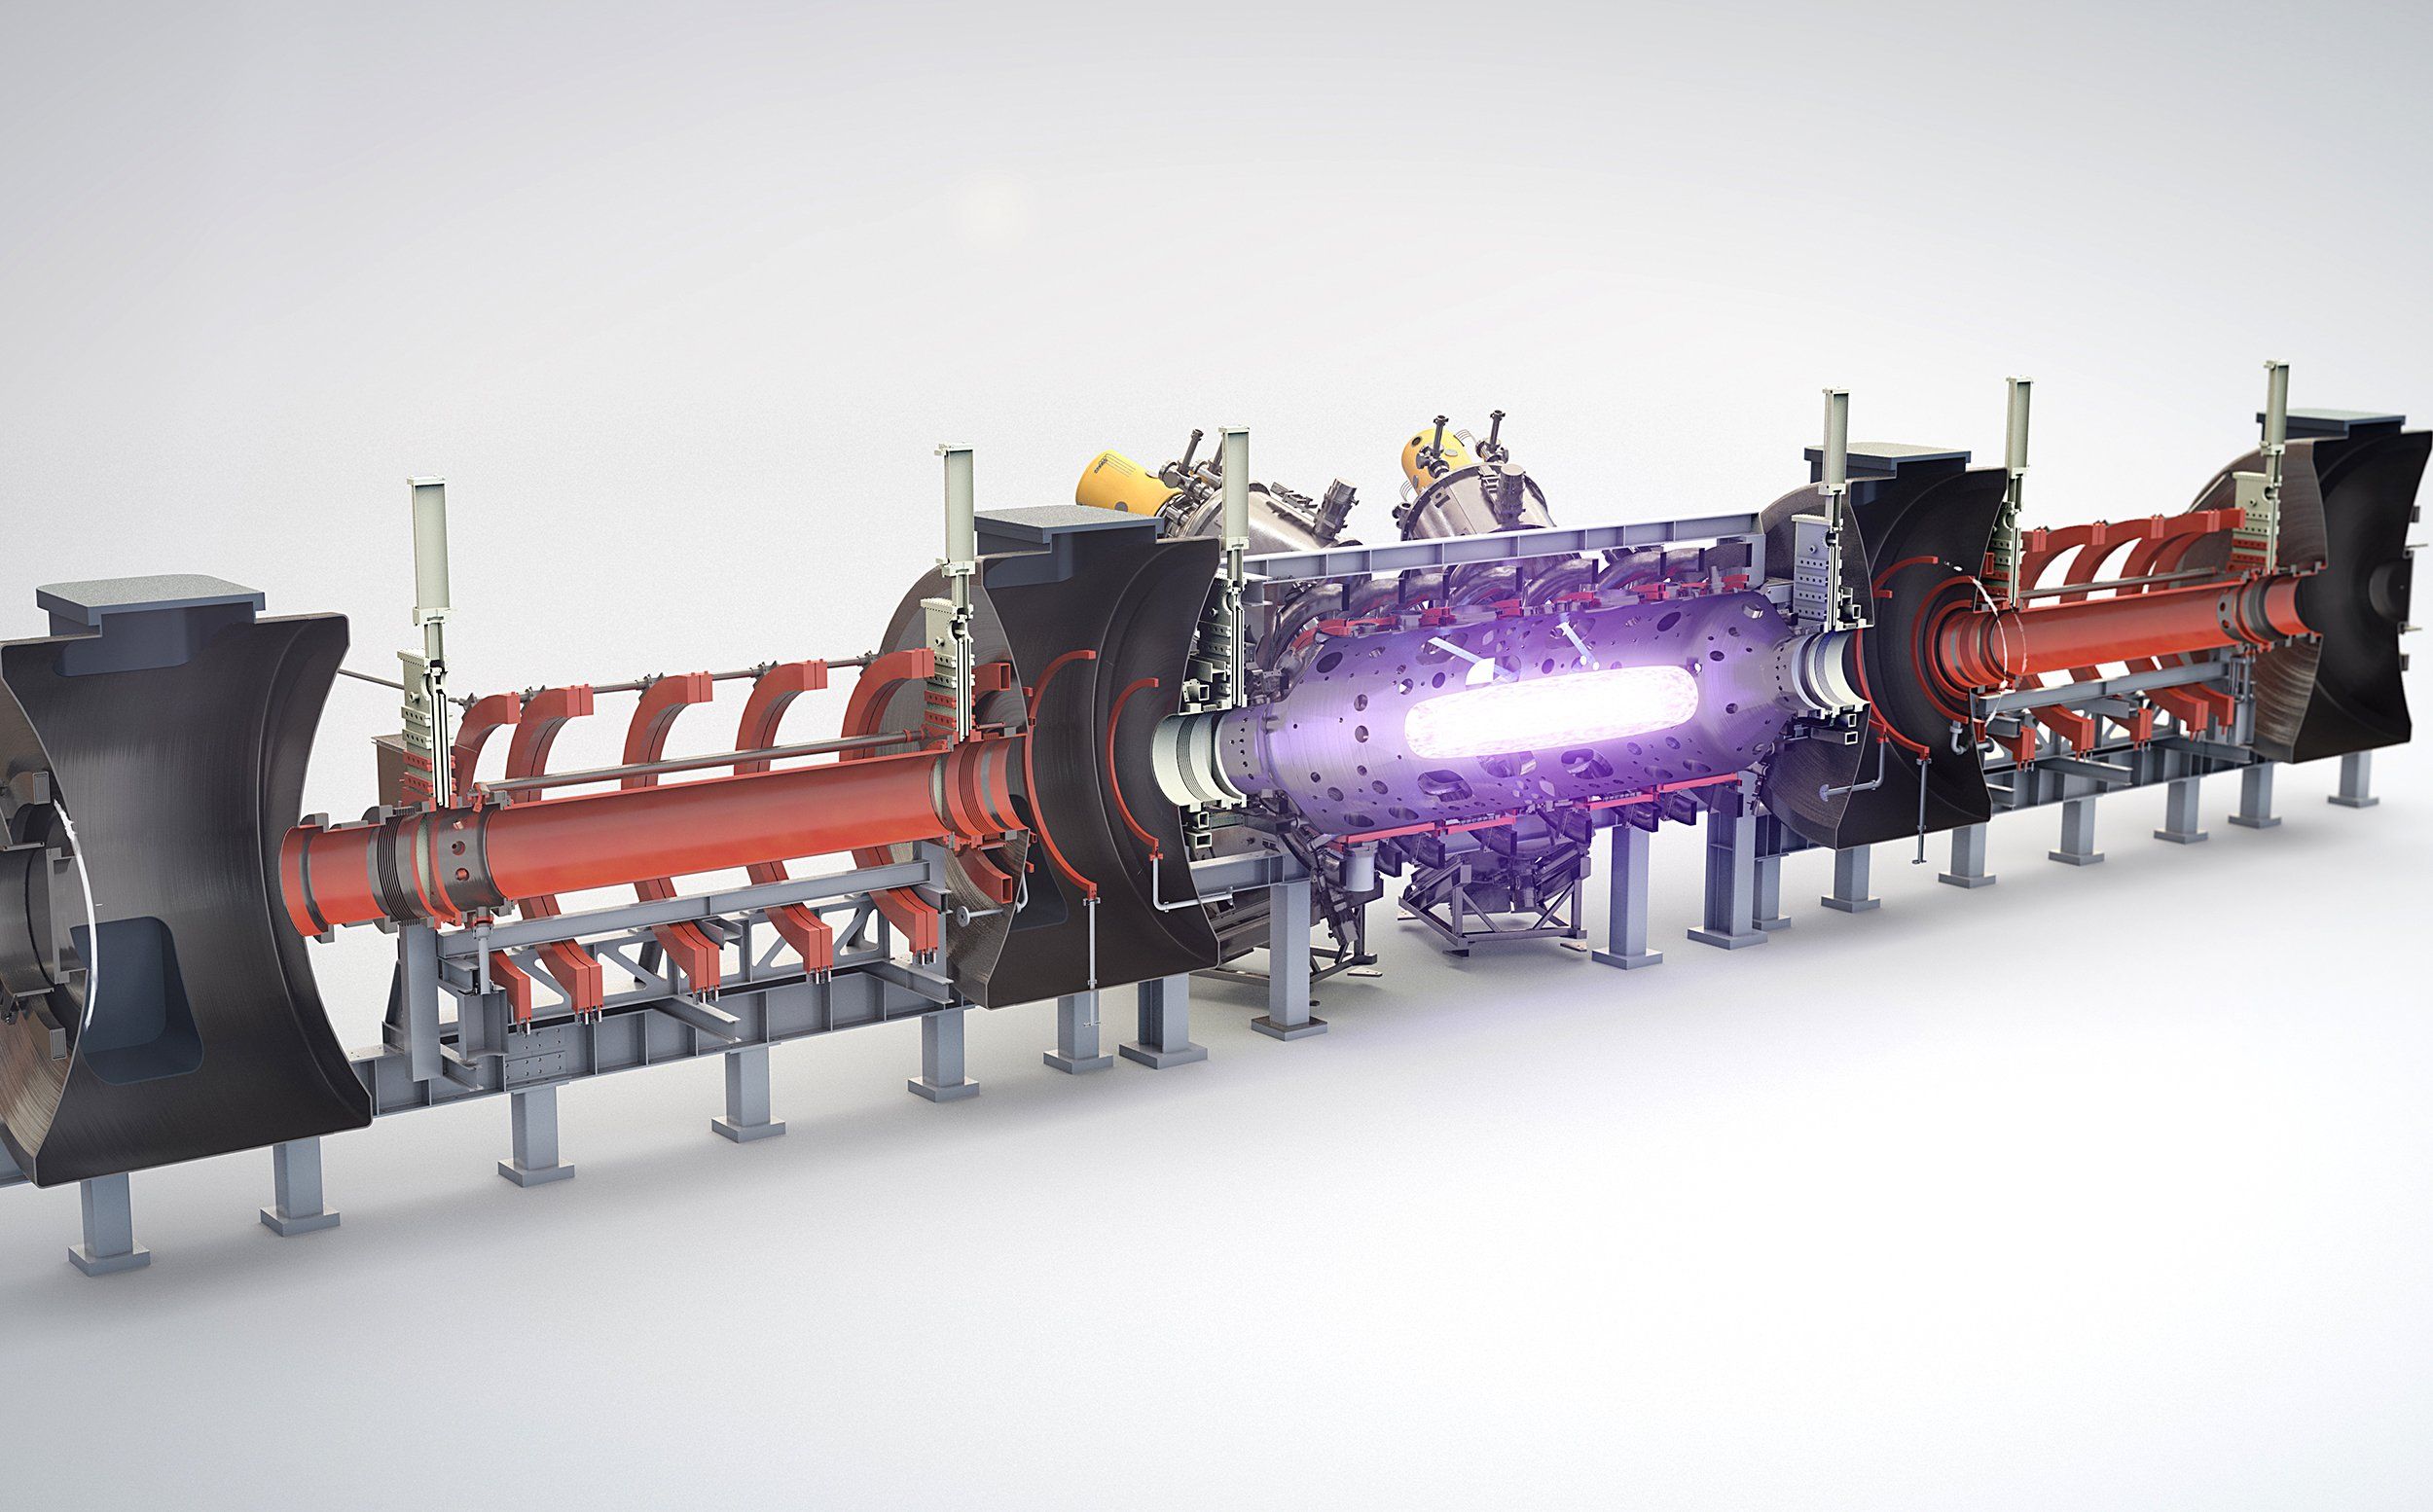 A rendering shows the internal view of a cylindrical fusion reactor, with a middle section highlighting glowing purple light held in its center. 